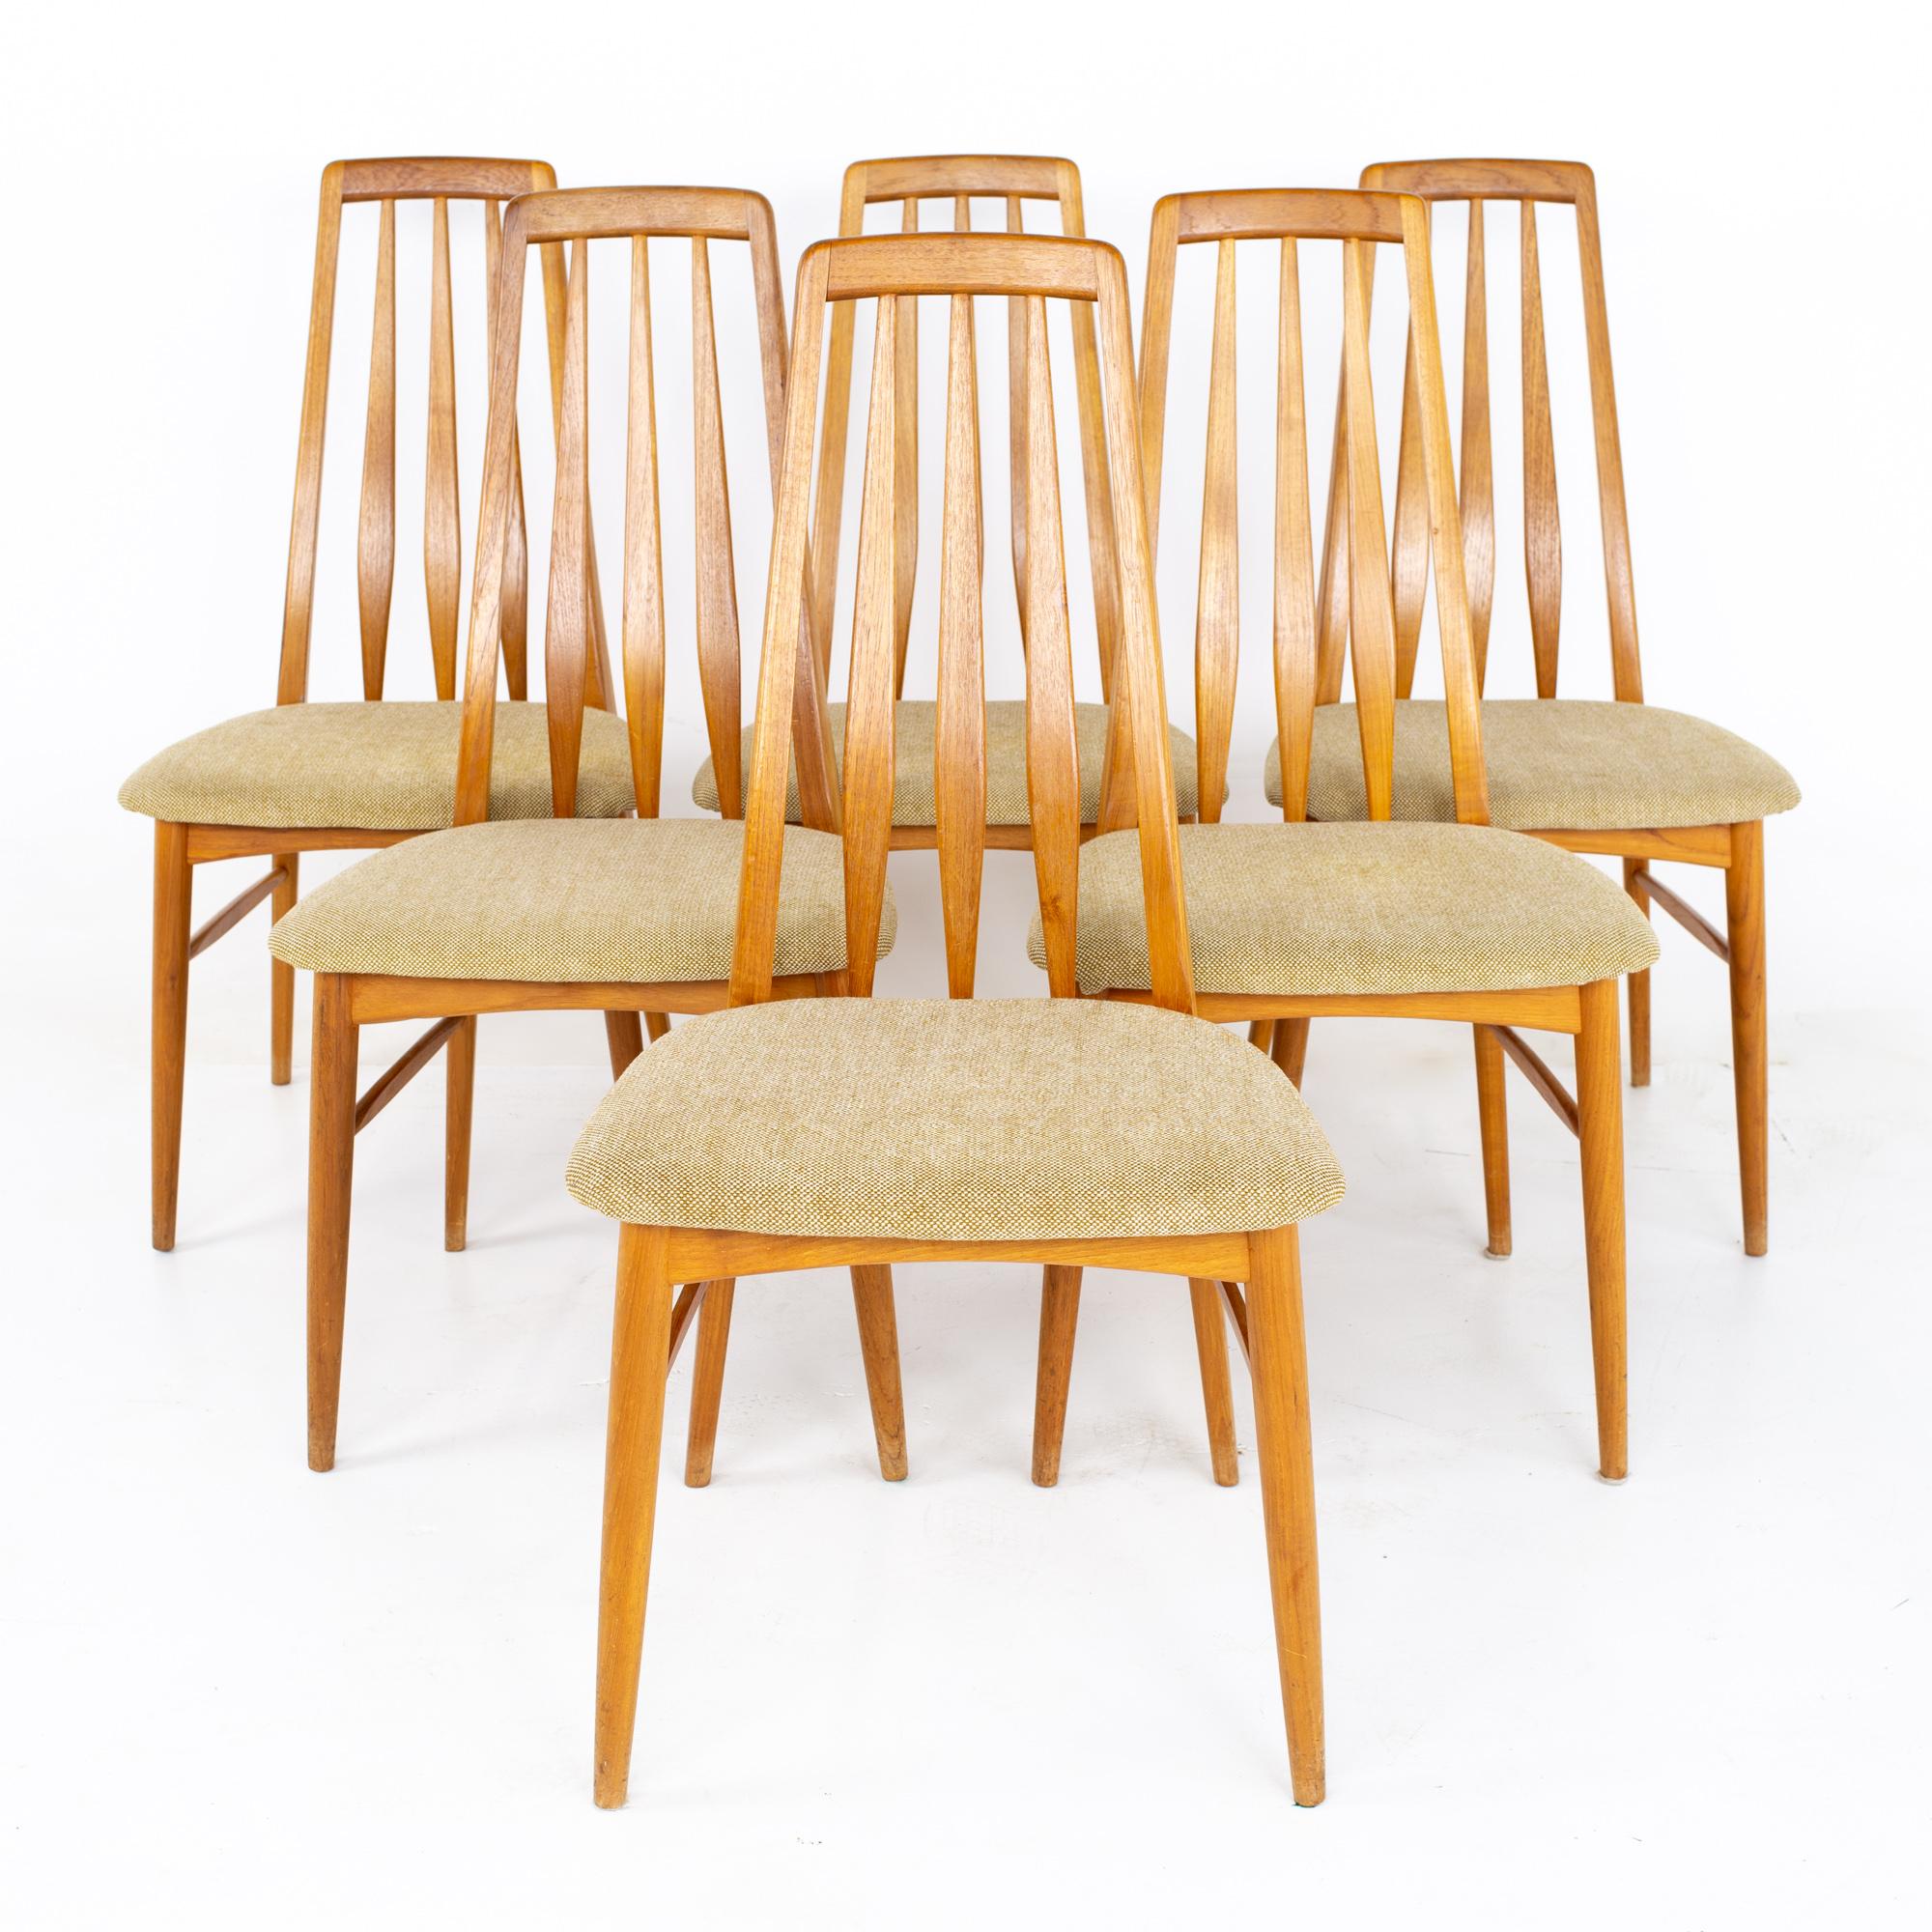 Niels Koefoeds Hornslet mid century eva teak dining chairs - set of 6
Each chair measures: 18.75 wide x 19 deep x 37.75 high, with a seat height of 17.5 inches 

All pieces of furniture can be had in what we call restored vintage condition. That